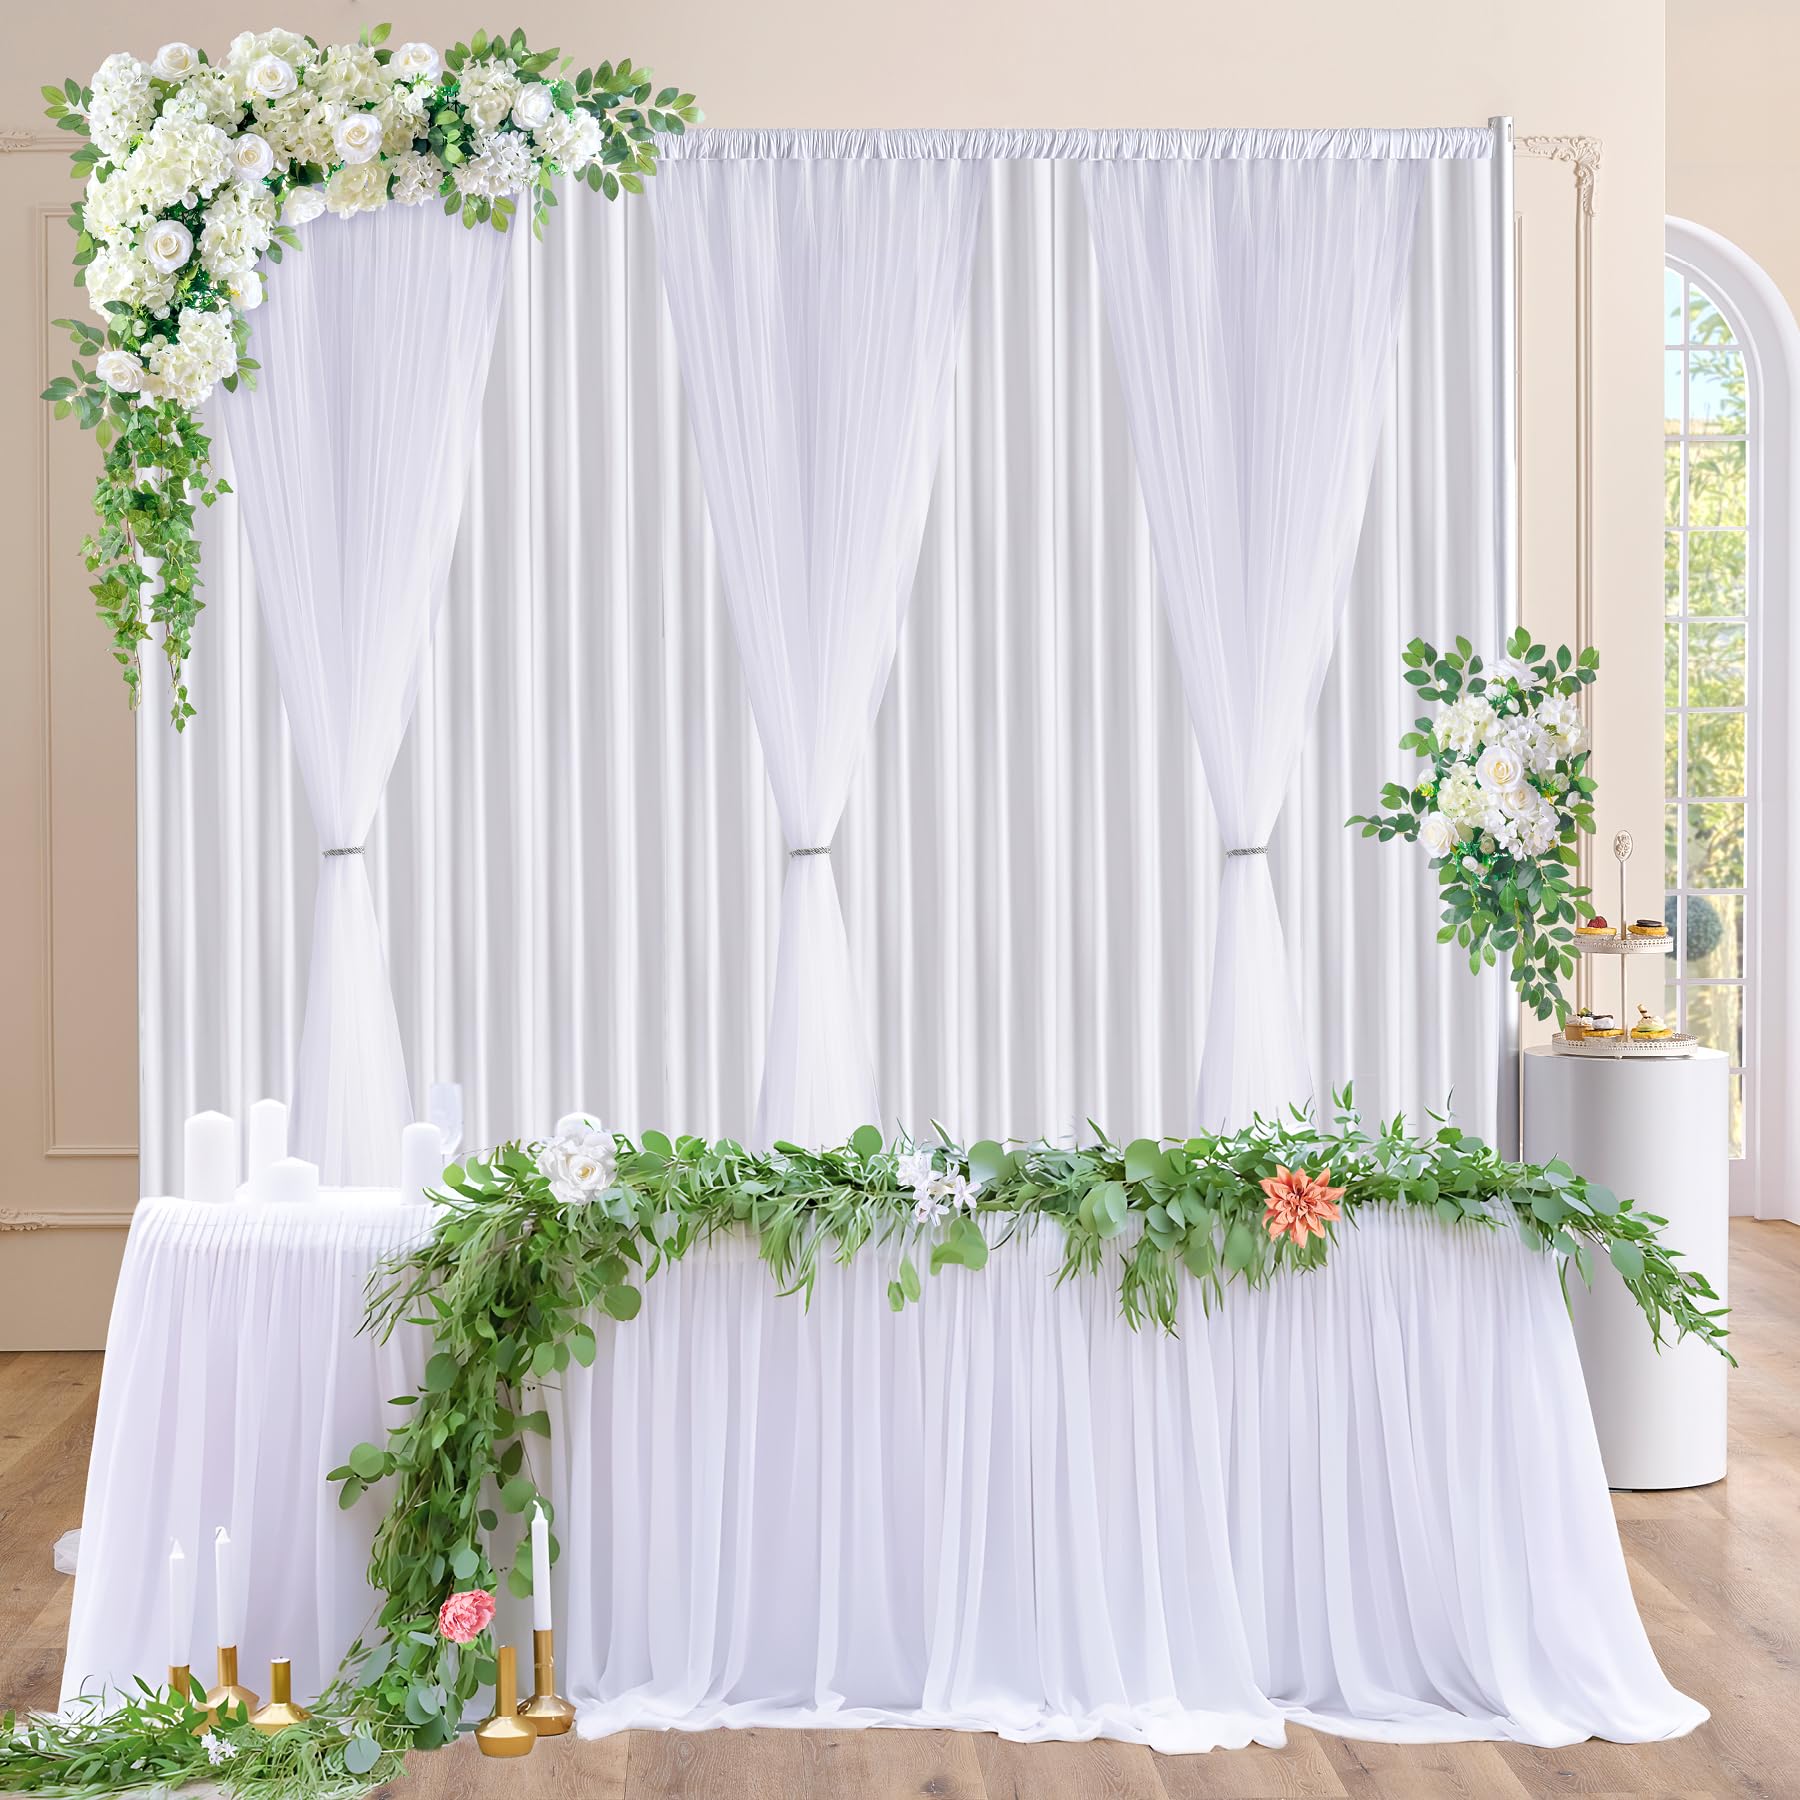 White Tulle Backdrop Curtains for Baby Shower Party Wedding Photo Drape Backdrop for Photography Props Engagement Bridal Shower 10 ft X 10 ft